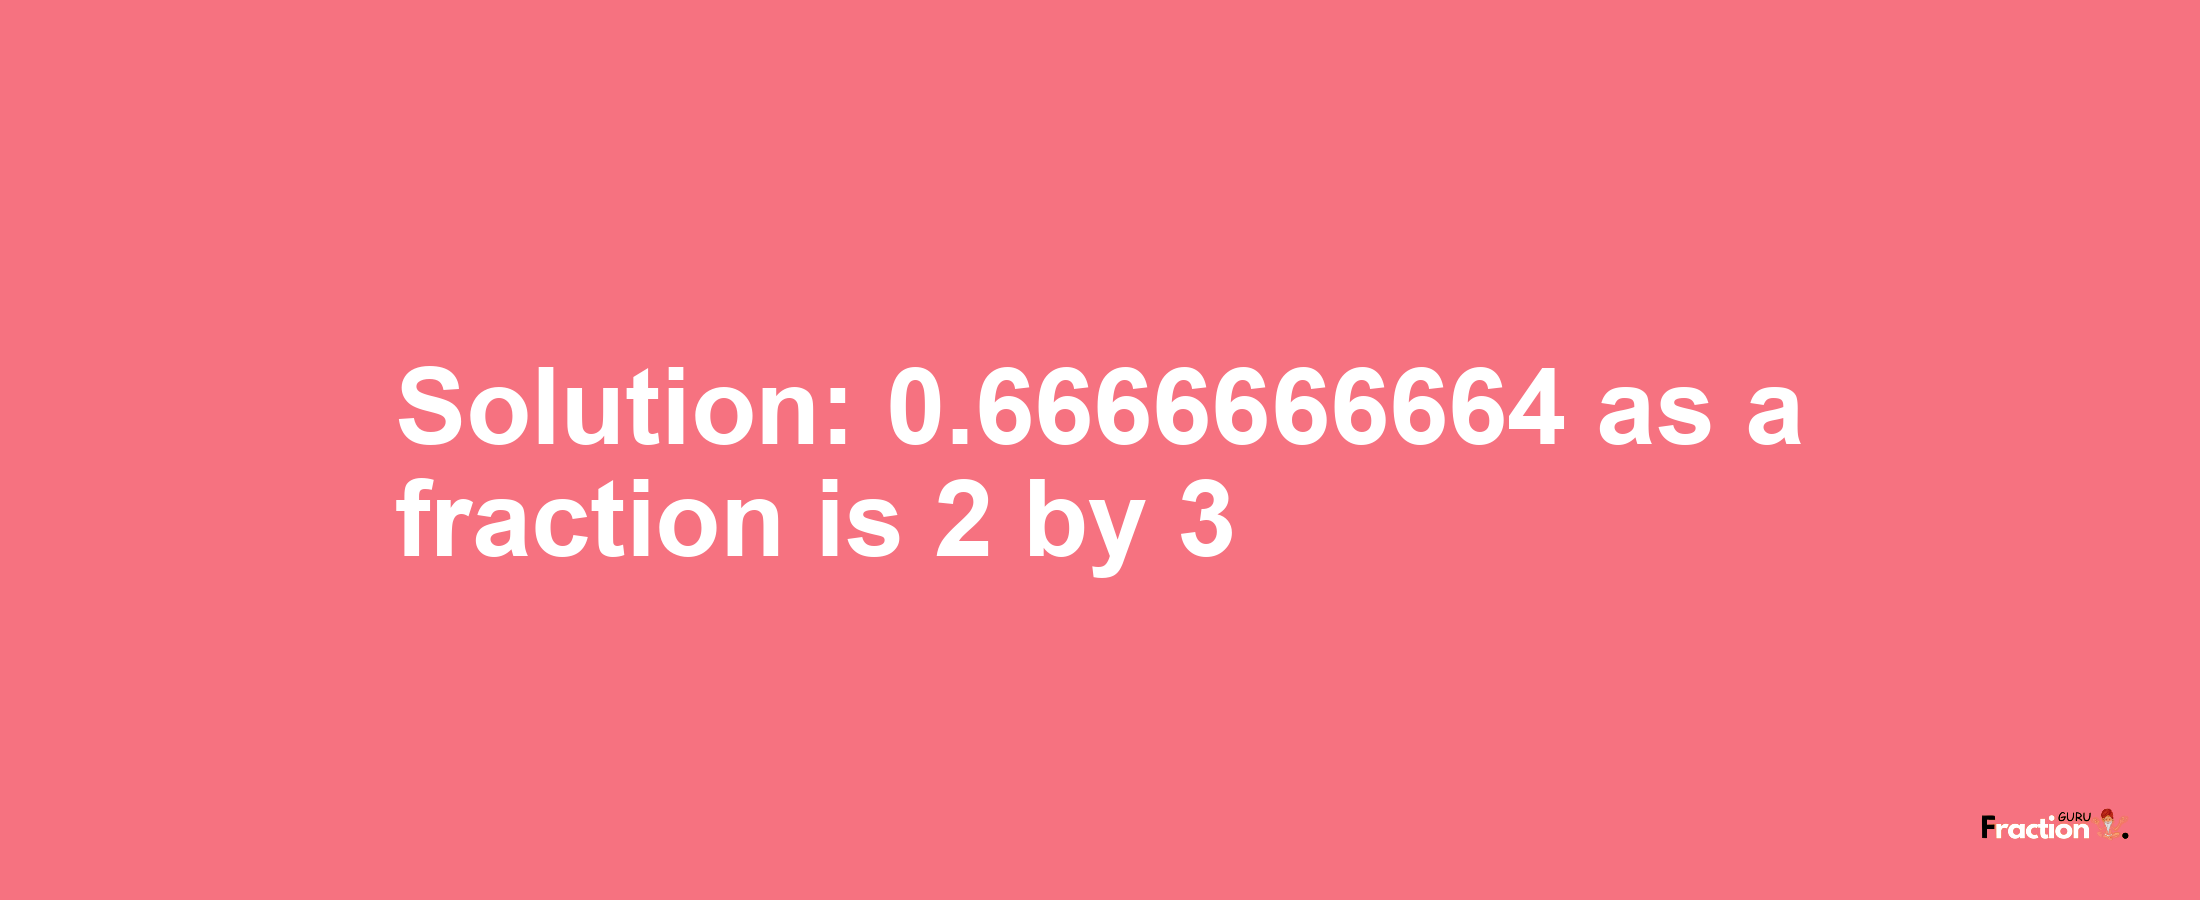 Solution:0.6666666664 as a fraction is 2/3